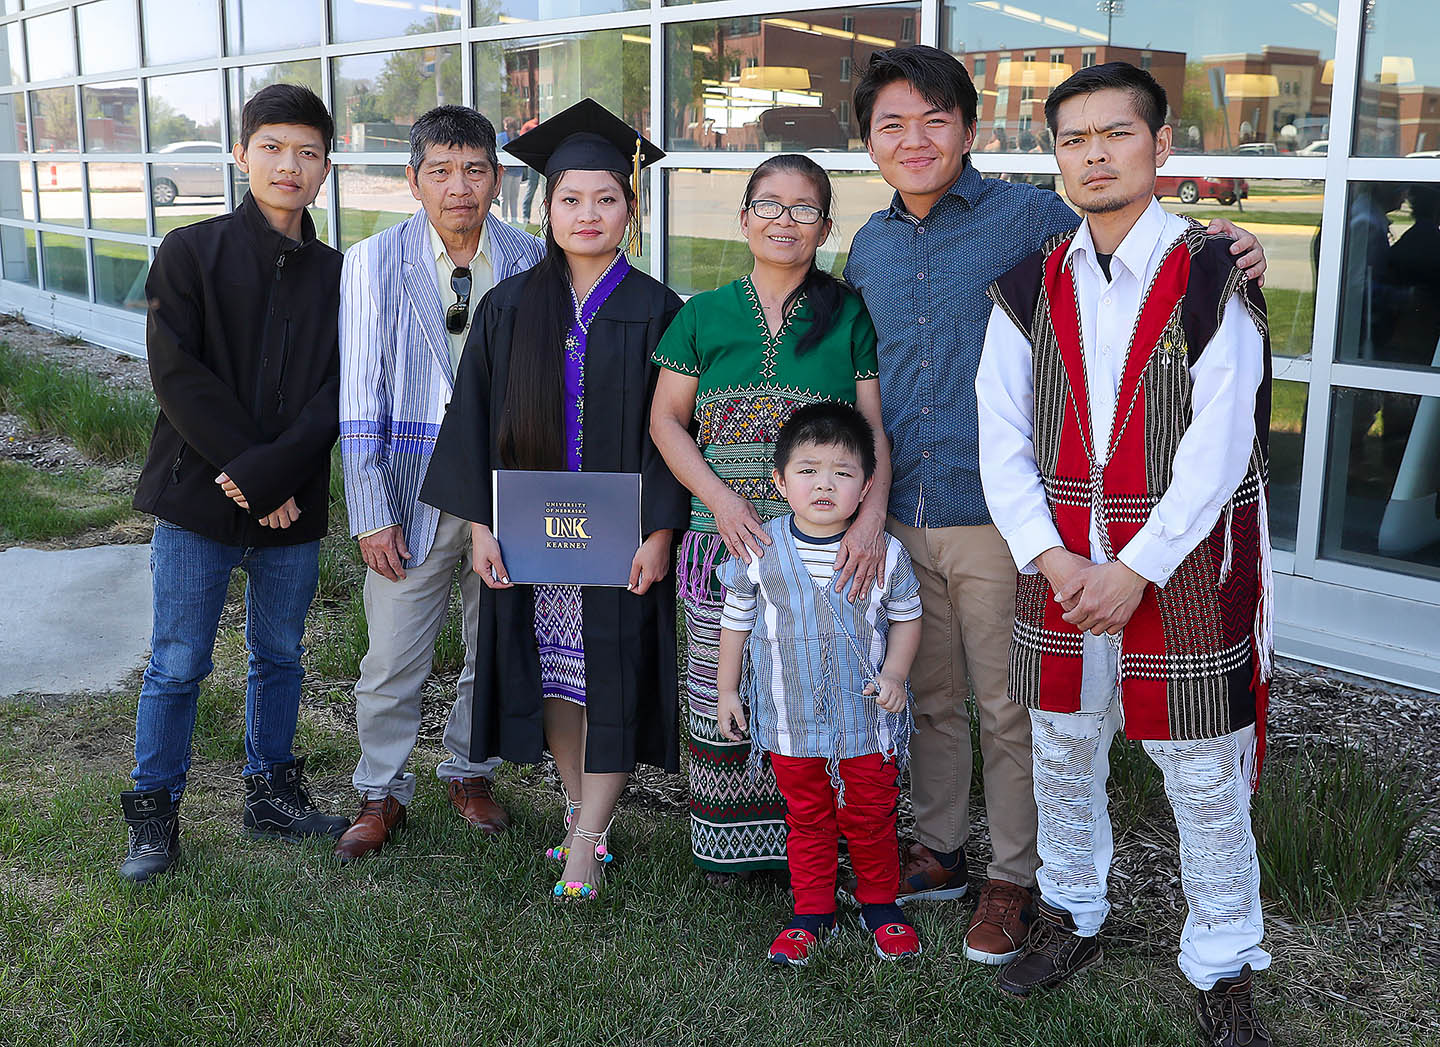 Me Maw poses for a photo with her family Friday after graduating from UNK with a bachelor’s degree in social work.